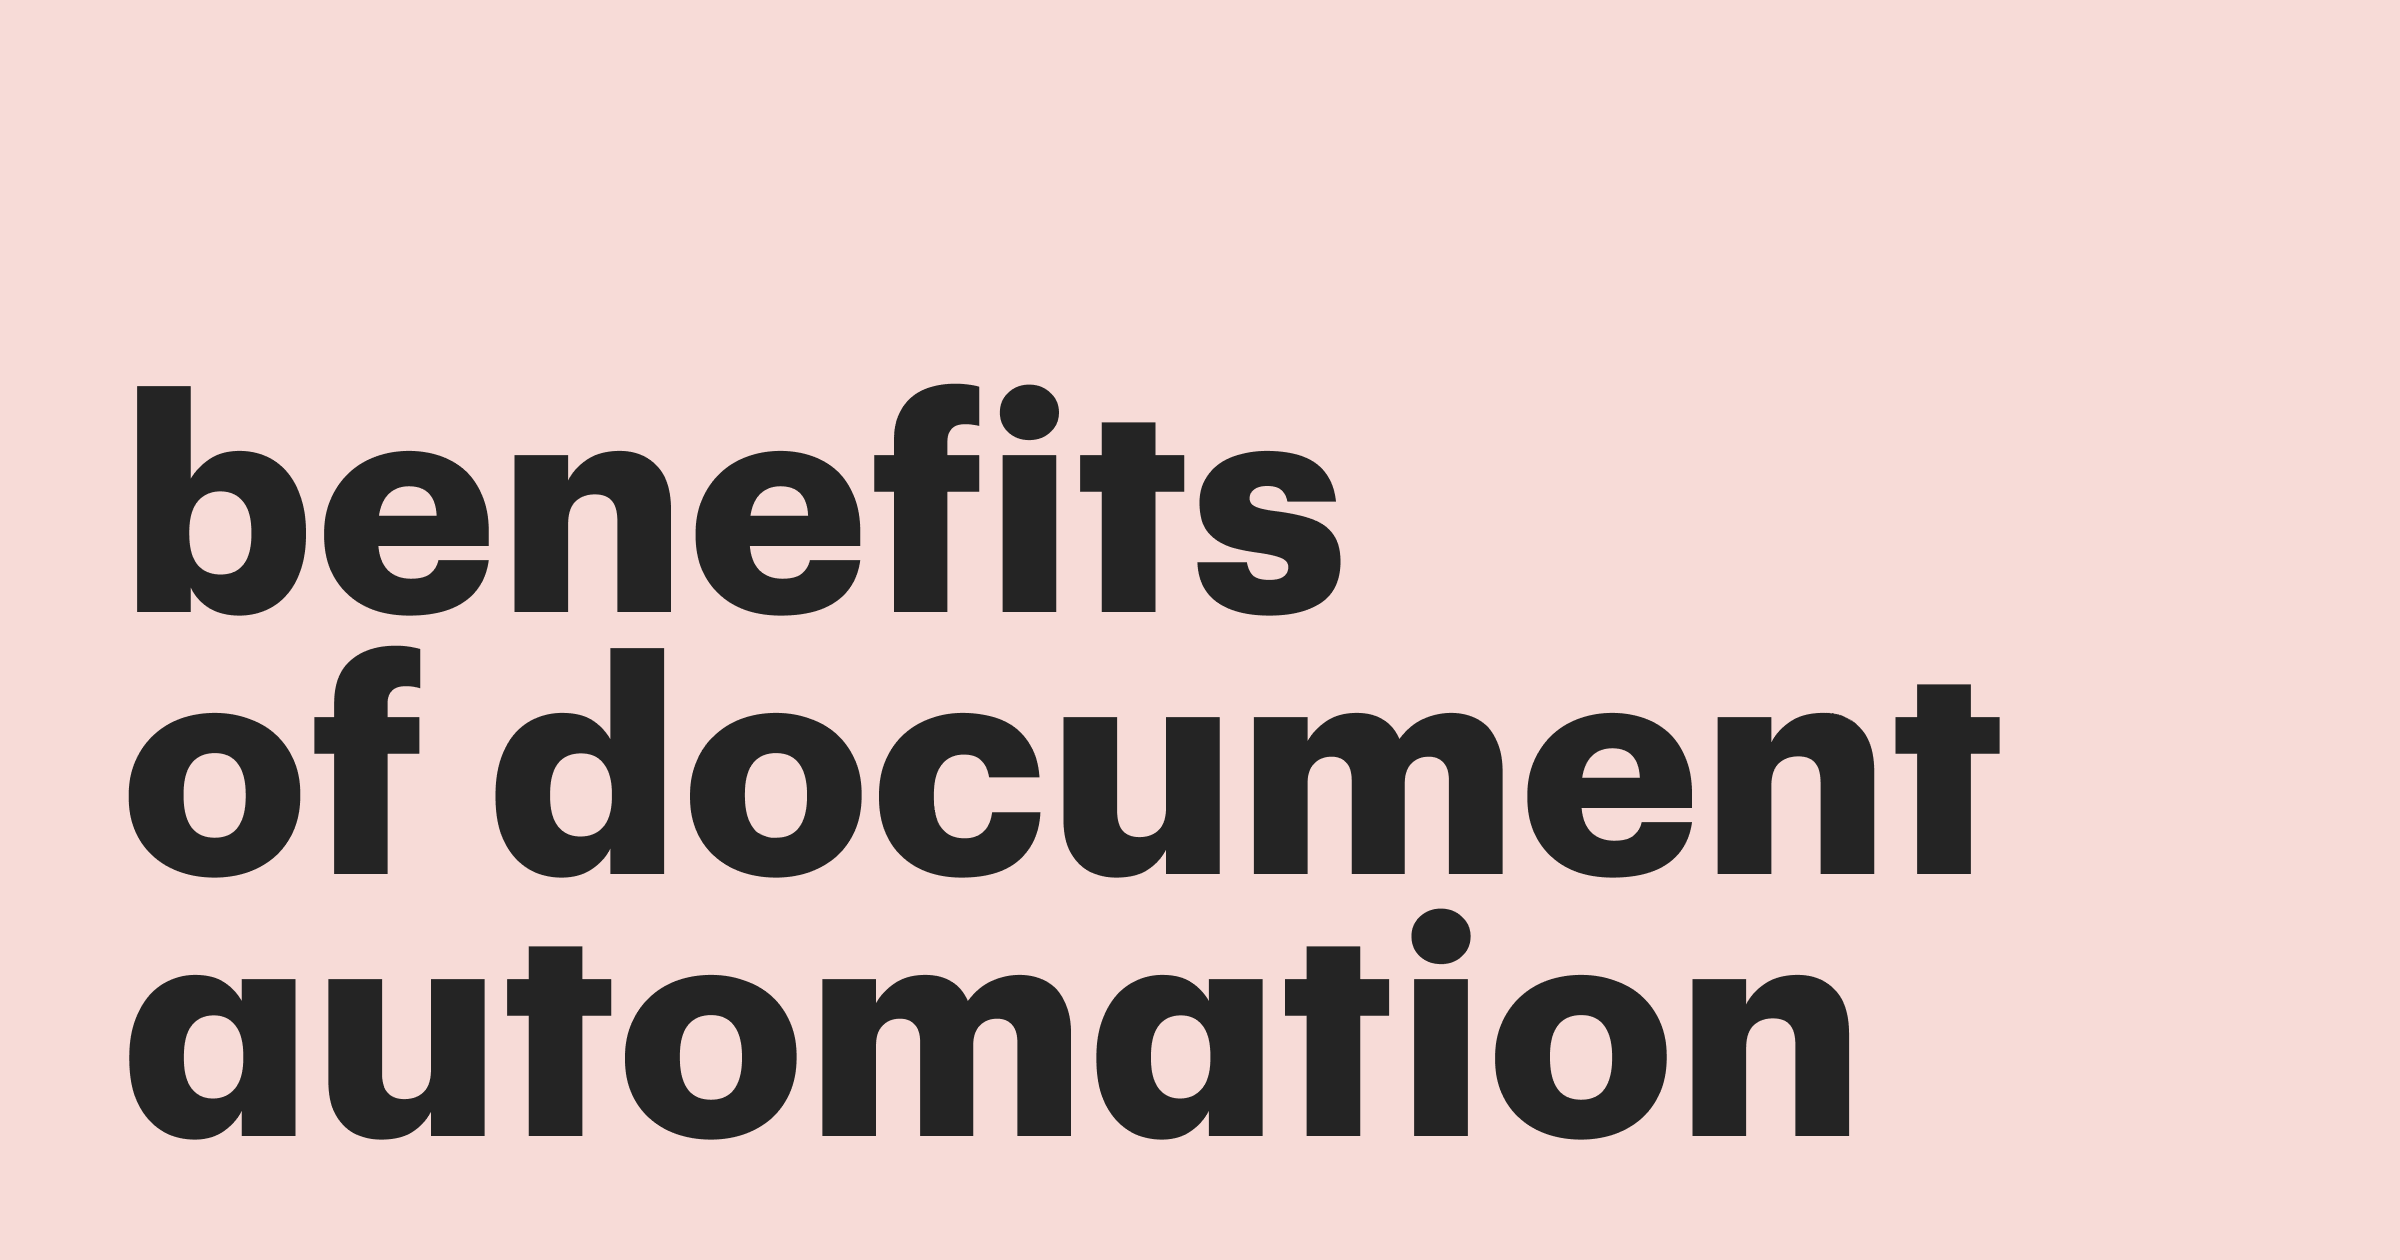 The multiple benefits of document automation